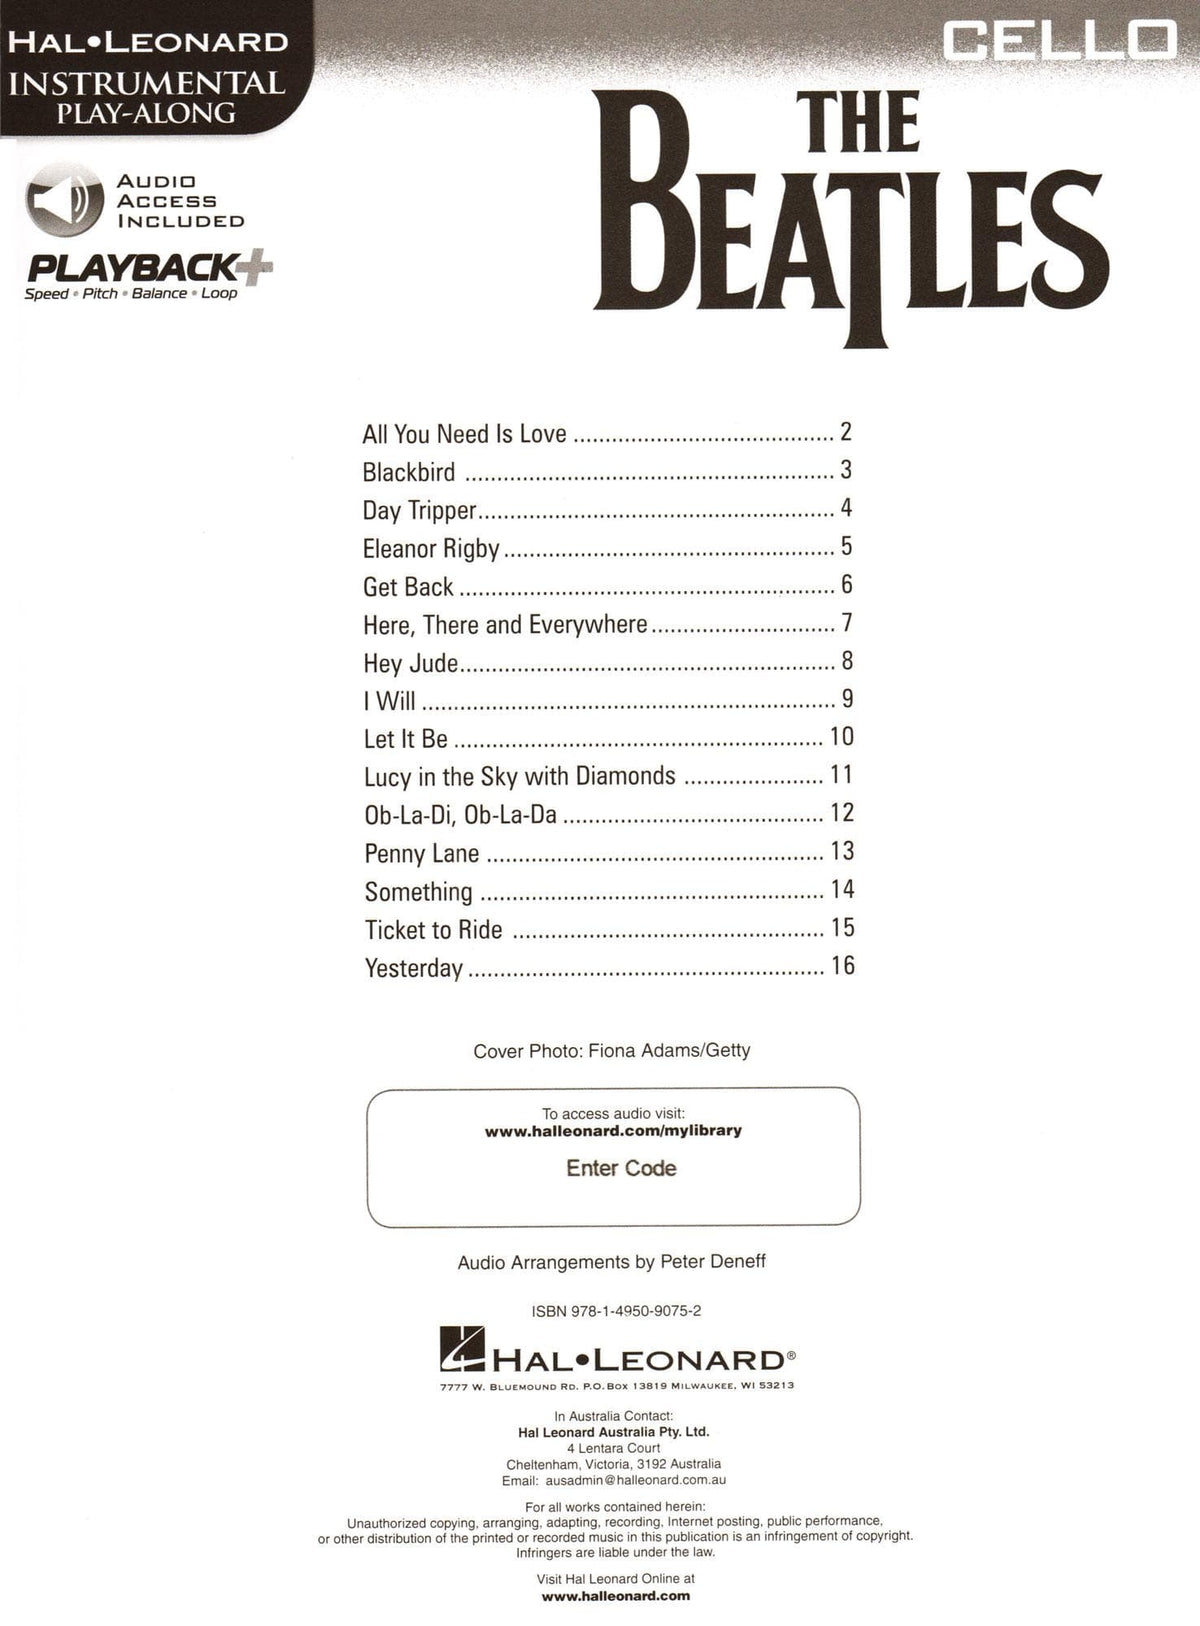 The Beatles - Instrumental Play-Along - 15 Songs - for Cello with Online Audio - Hal Leonard